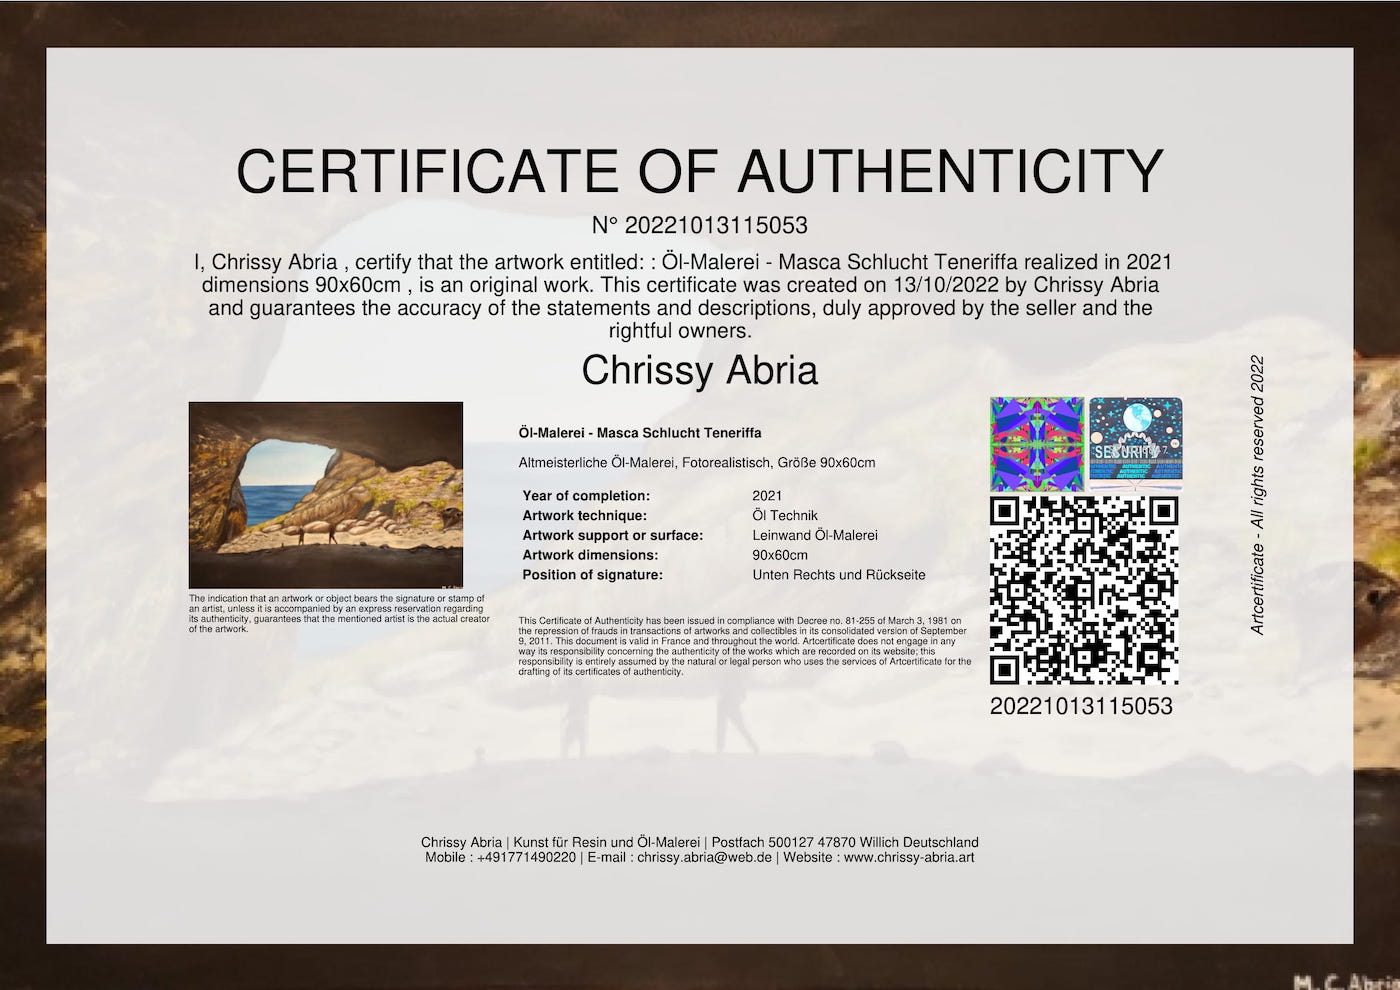 abria-painting-by-chrissy-abria-certificat-20221013115053-1